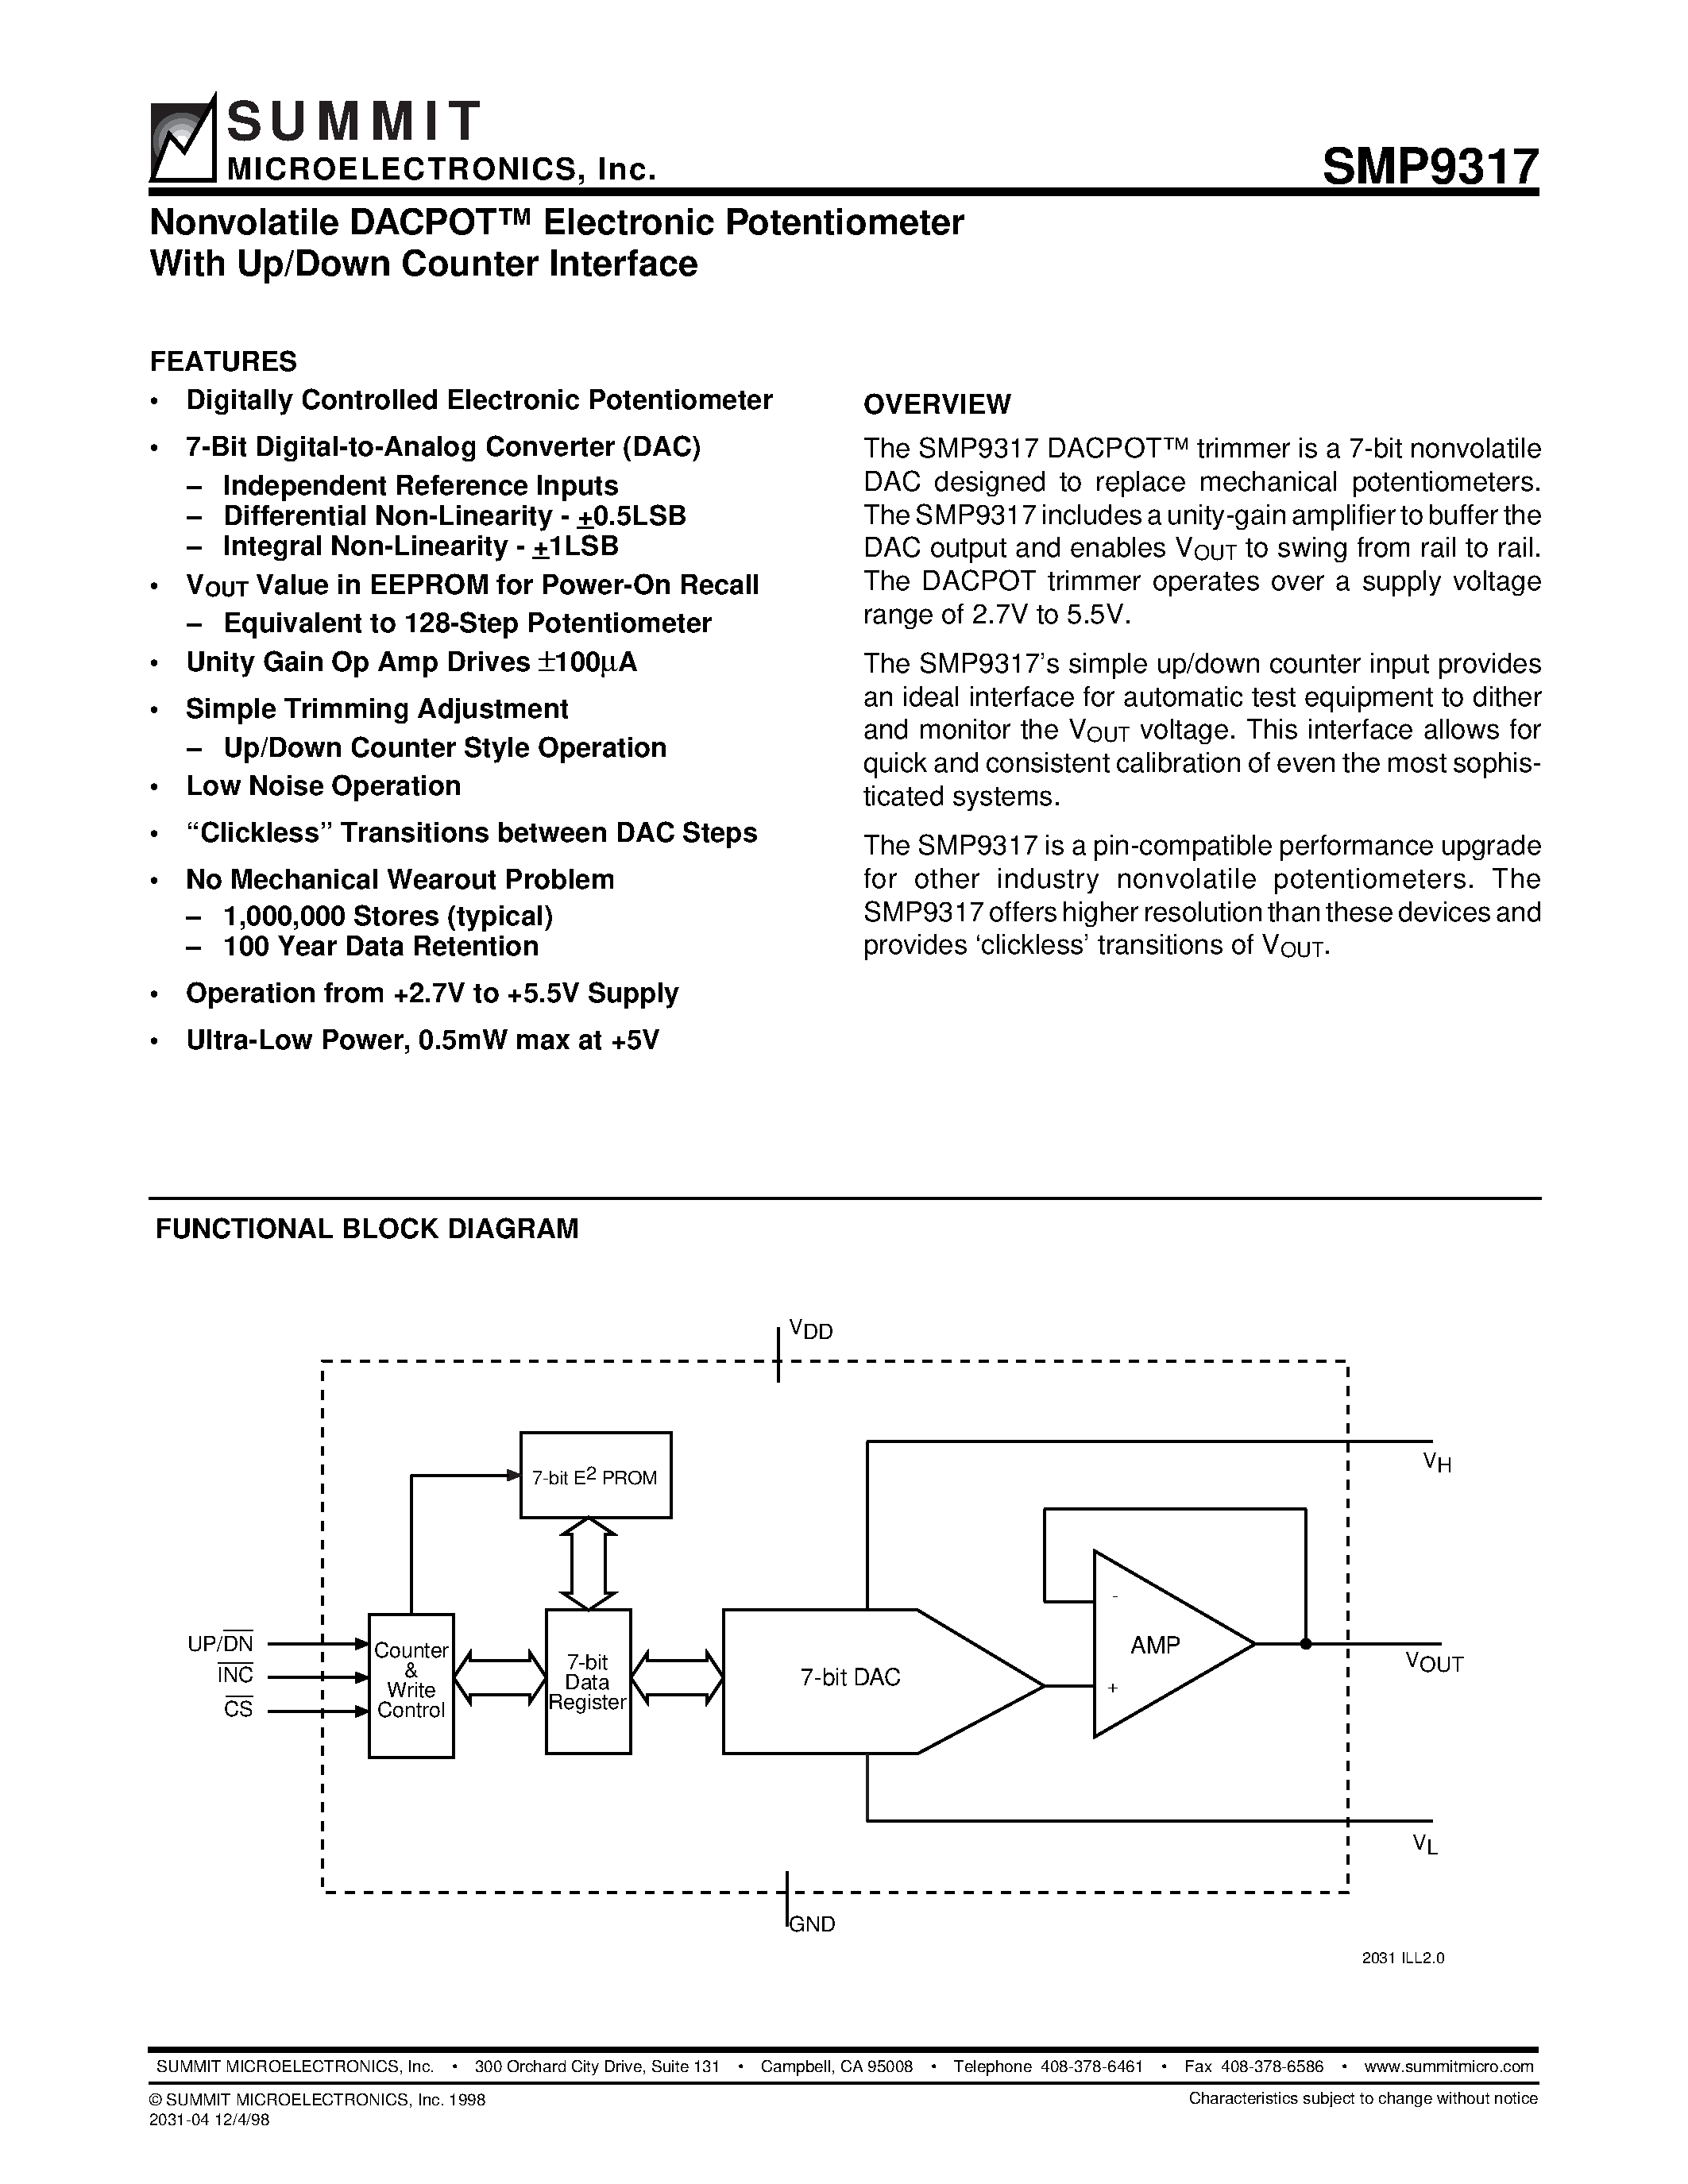 Datasheet SMP9317 - Nonvolatile DACPOT Electronic Potentiometer With Up/Down Counter Interface page 1